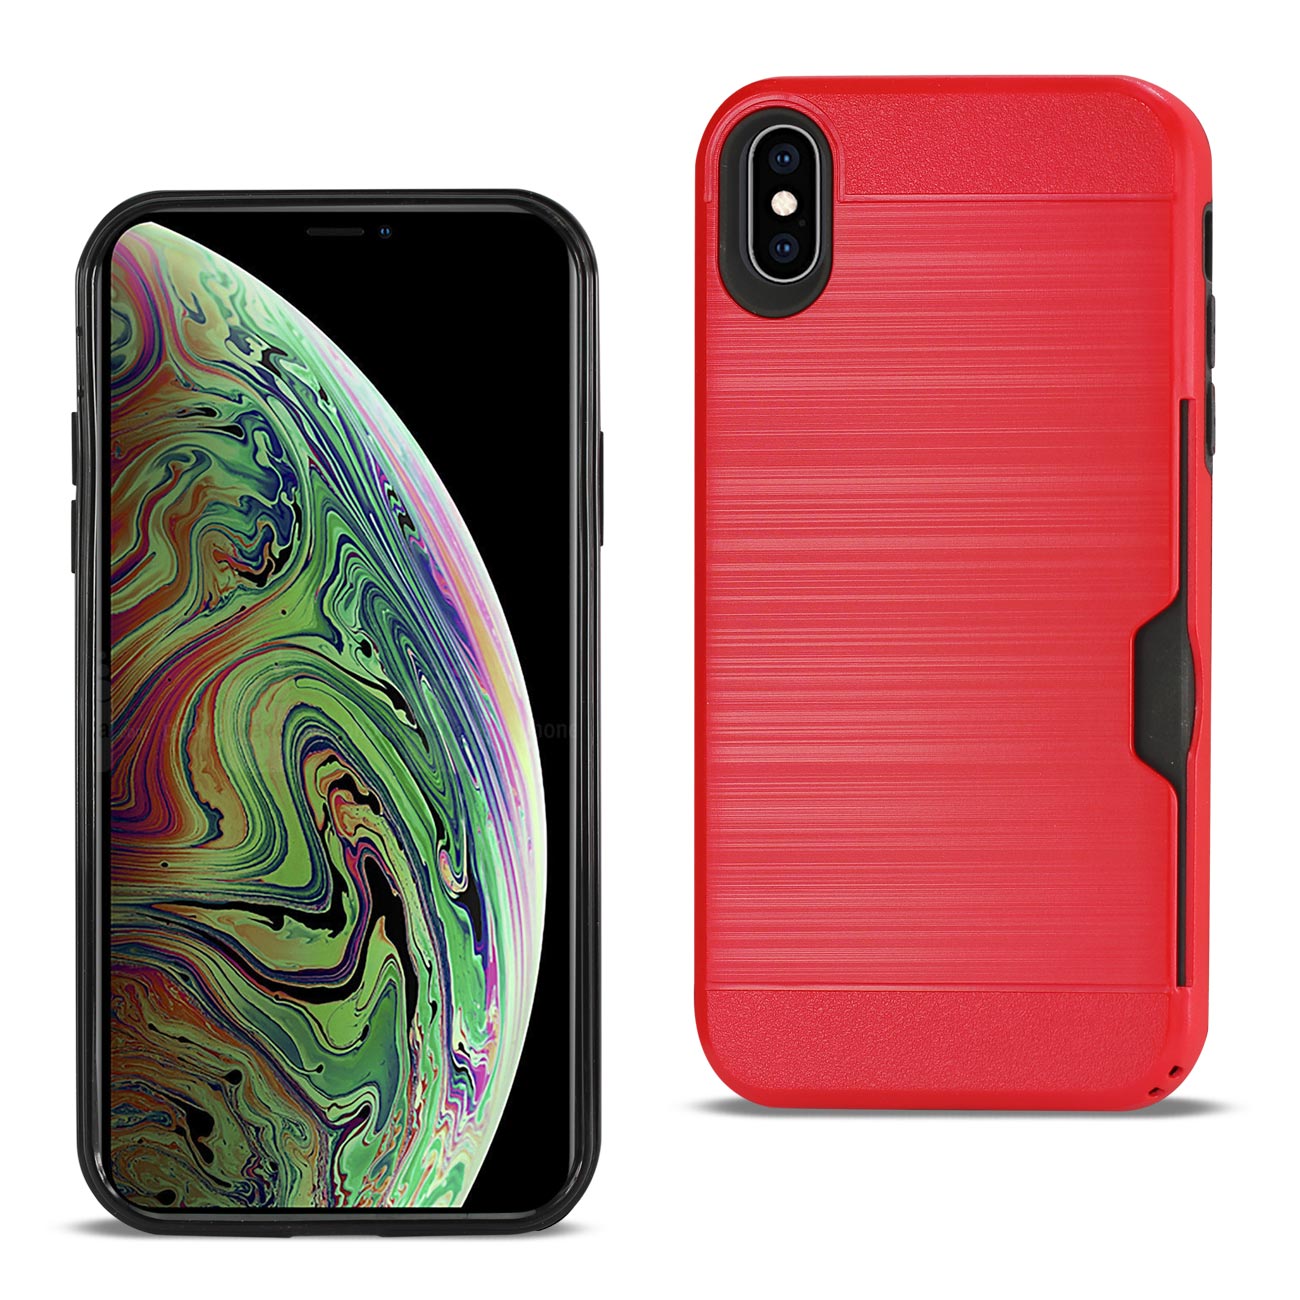 iPhone XS Max Slim Armor Hybrid Case With Card Holder In Red